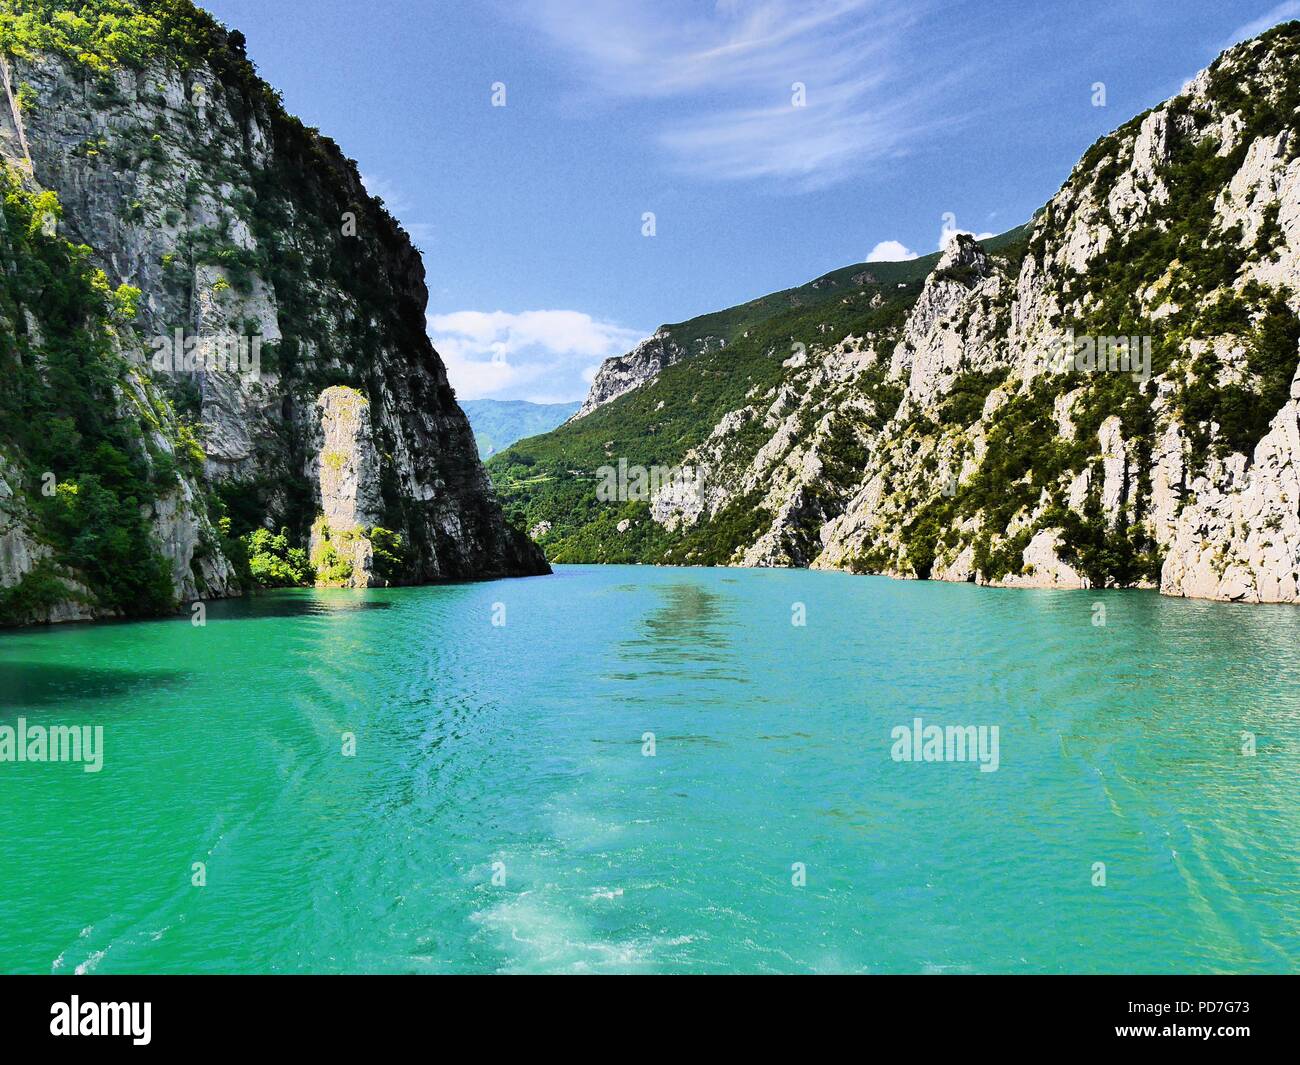 High contrast dreamy view of calm, turquoise waters of artificial Lake Komani and steep sides of valley, Albania, inviting adventure and exploration Stock Photo